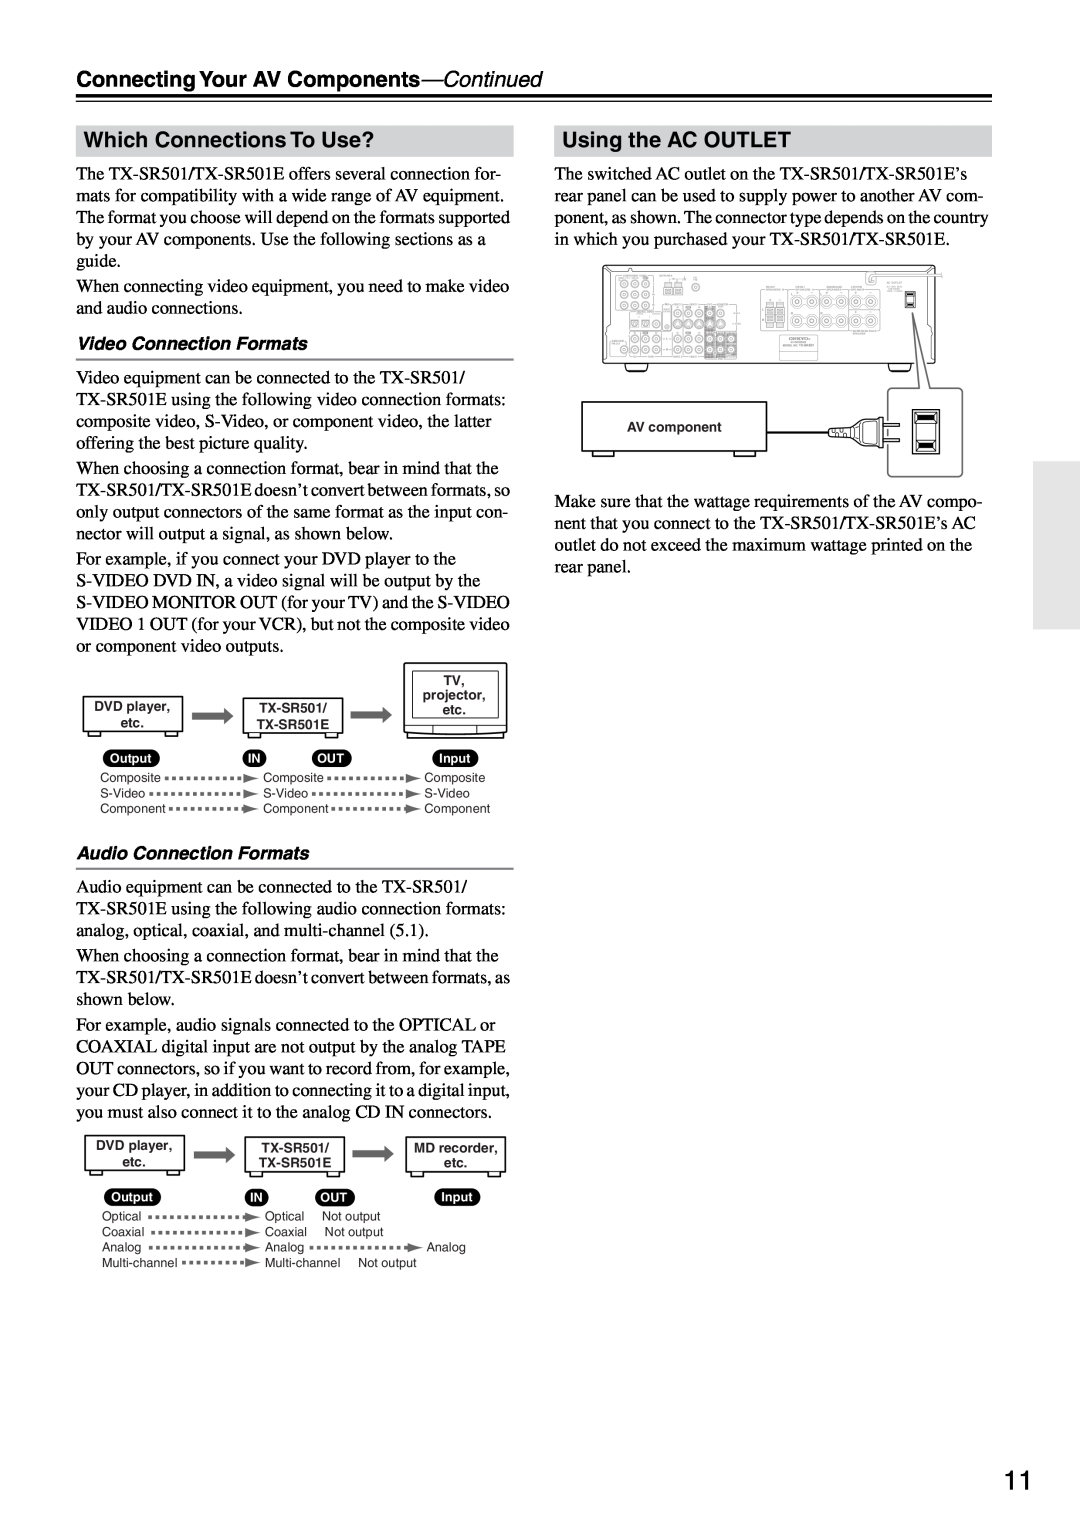 Onkyo TX-SR501E instruction manual Connecting Your AV Components-Continued, Which Connections To Use?, Using the AC OUTLET 